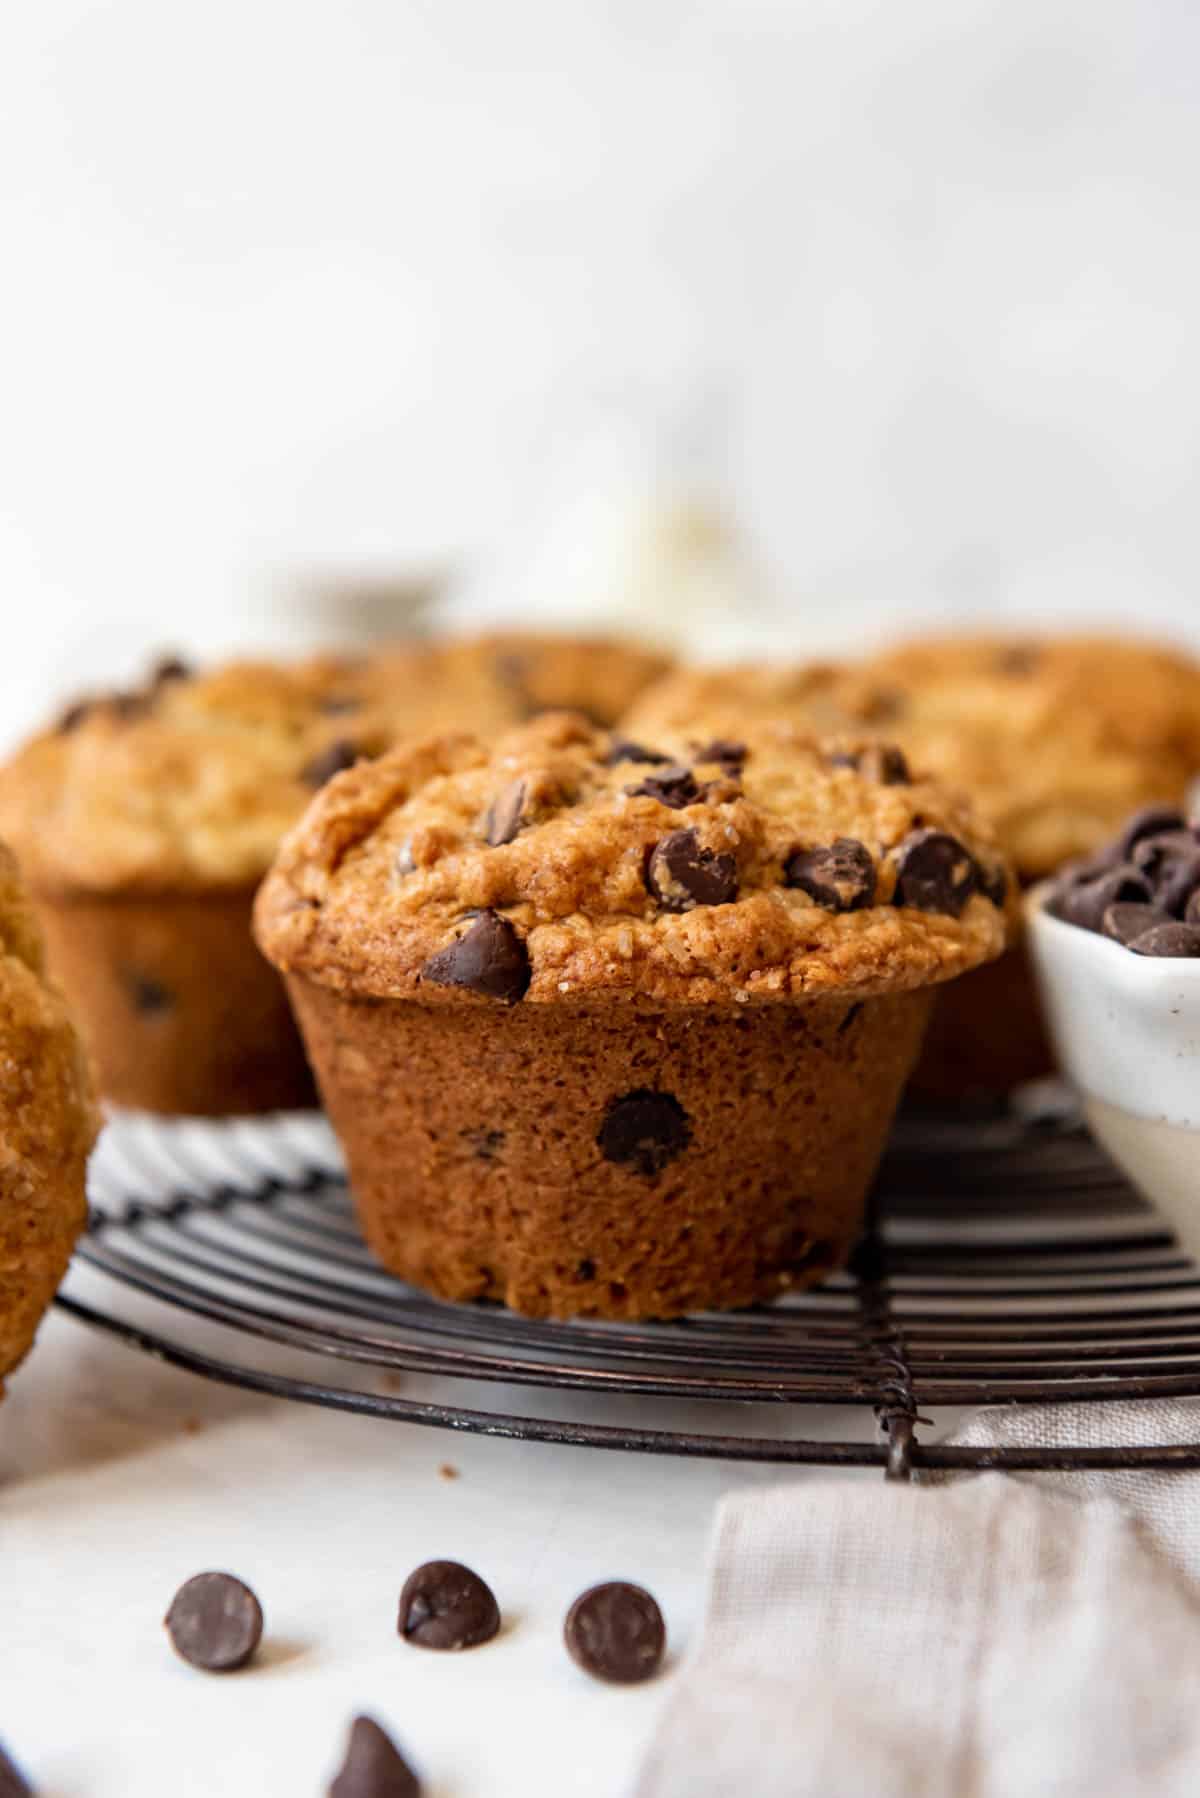 A chocolate chip muffin on a wire cooling rack with more muffins.